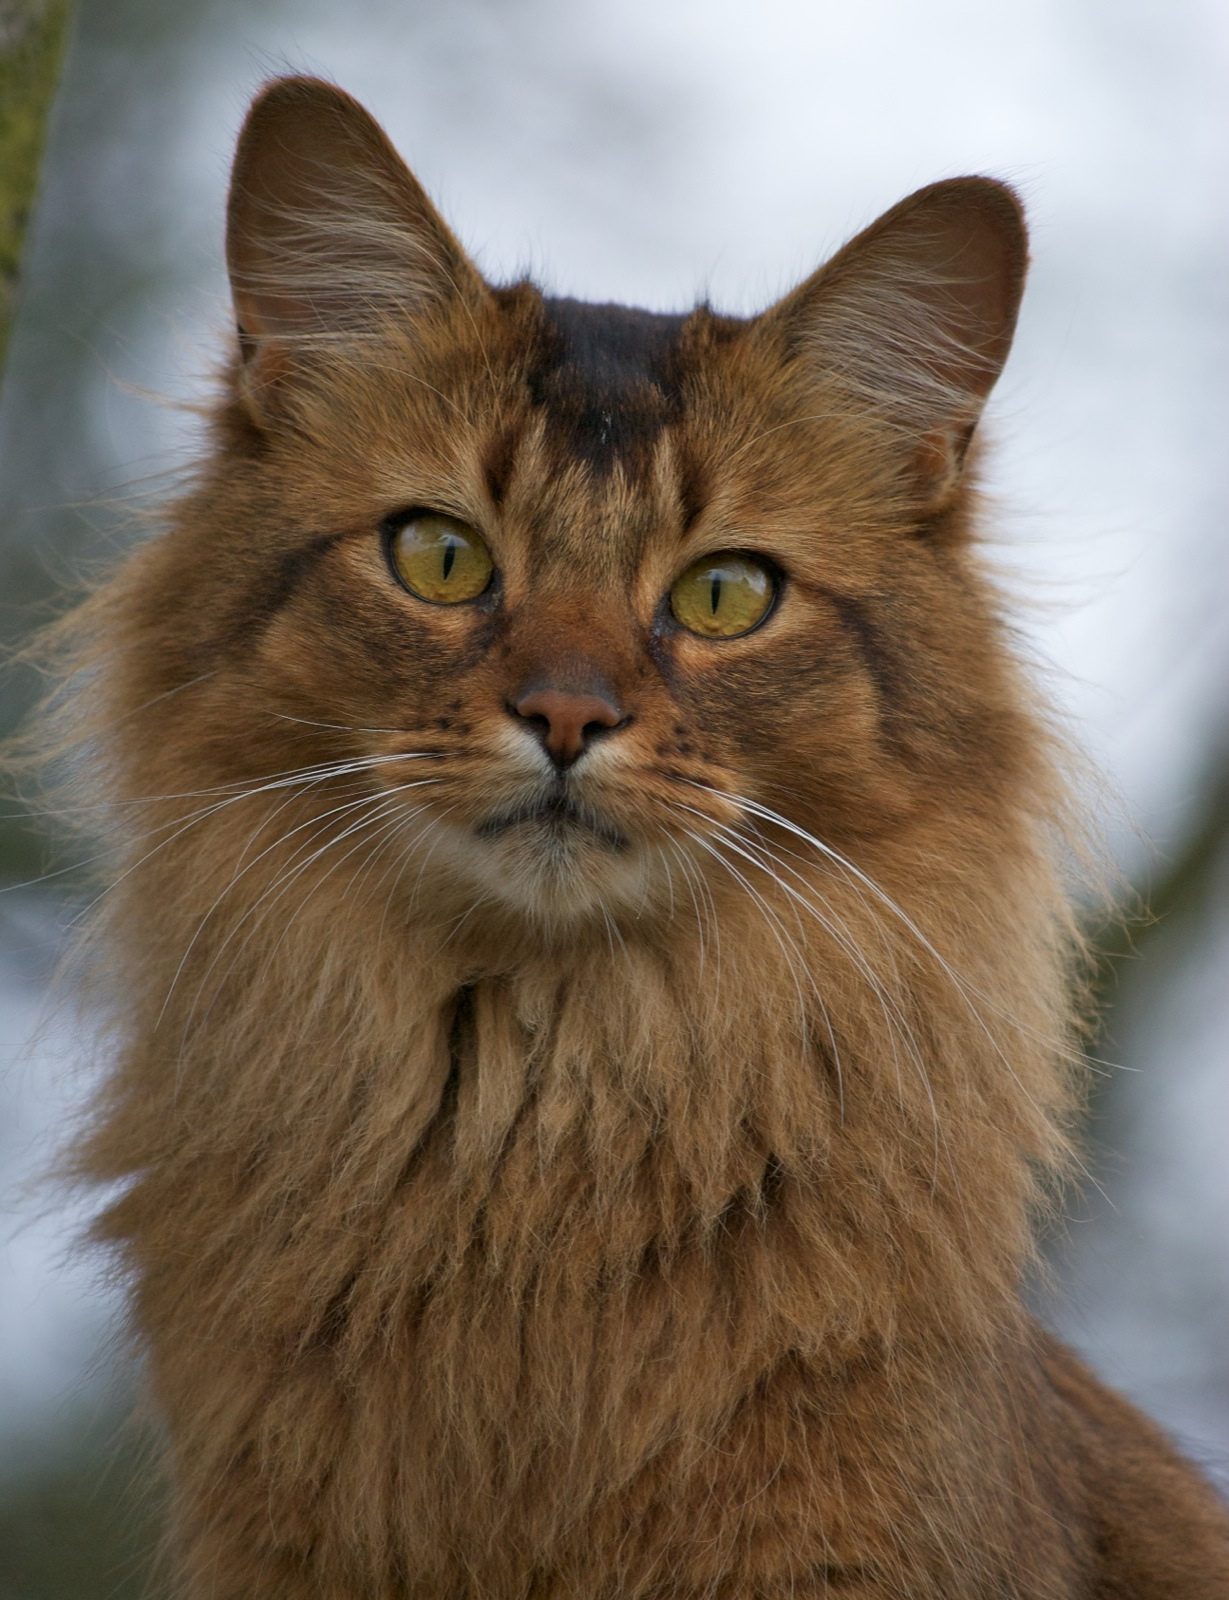  A cat with brown fur colour